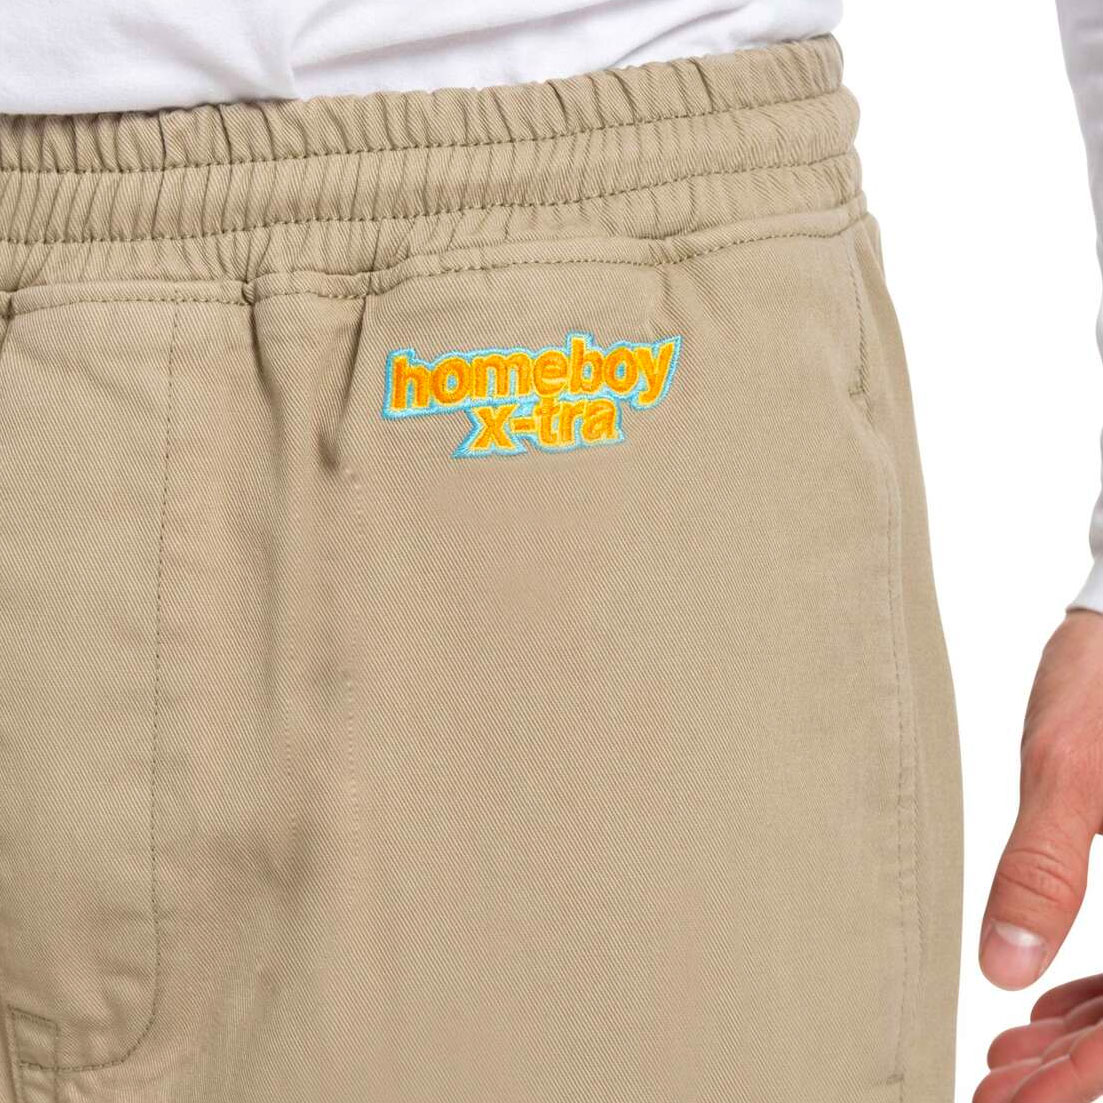 Homeboy Leisure Pant x-tra Beach Baggy Pant (dust)